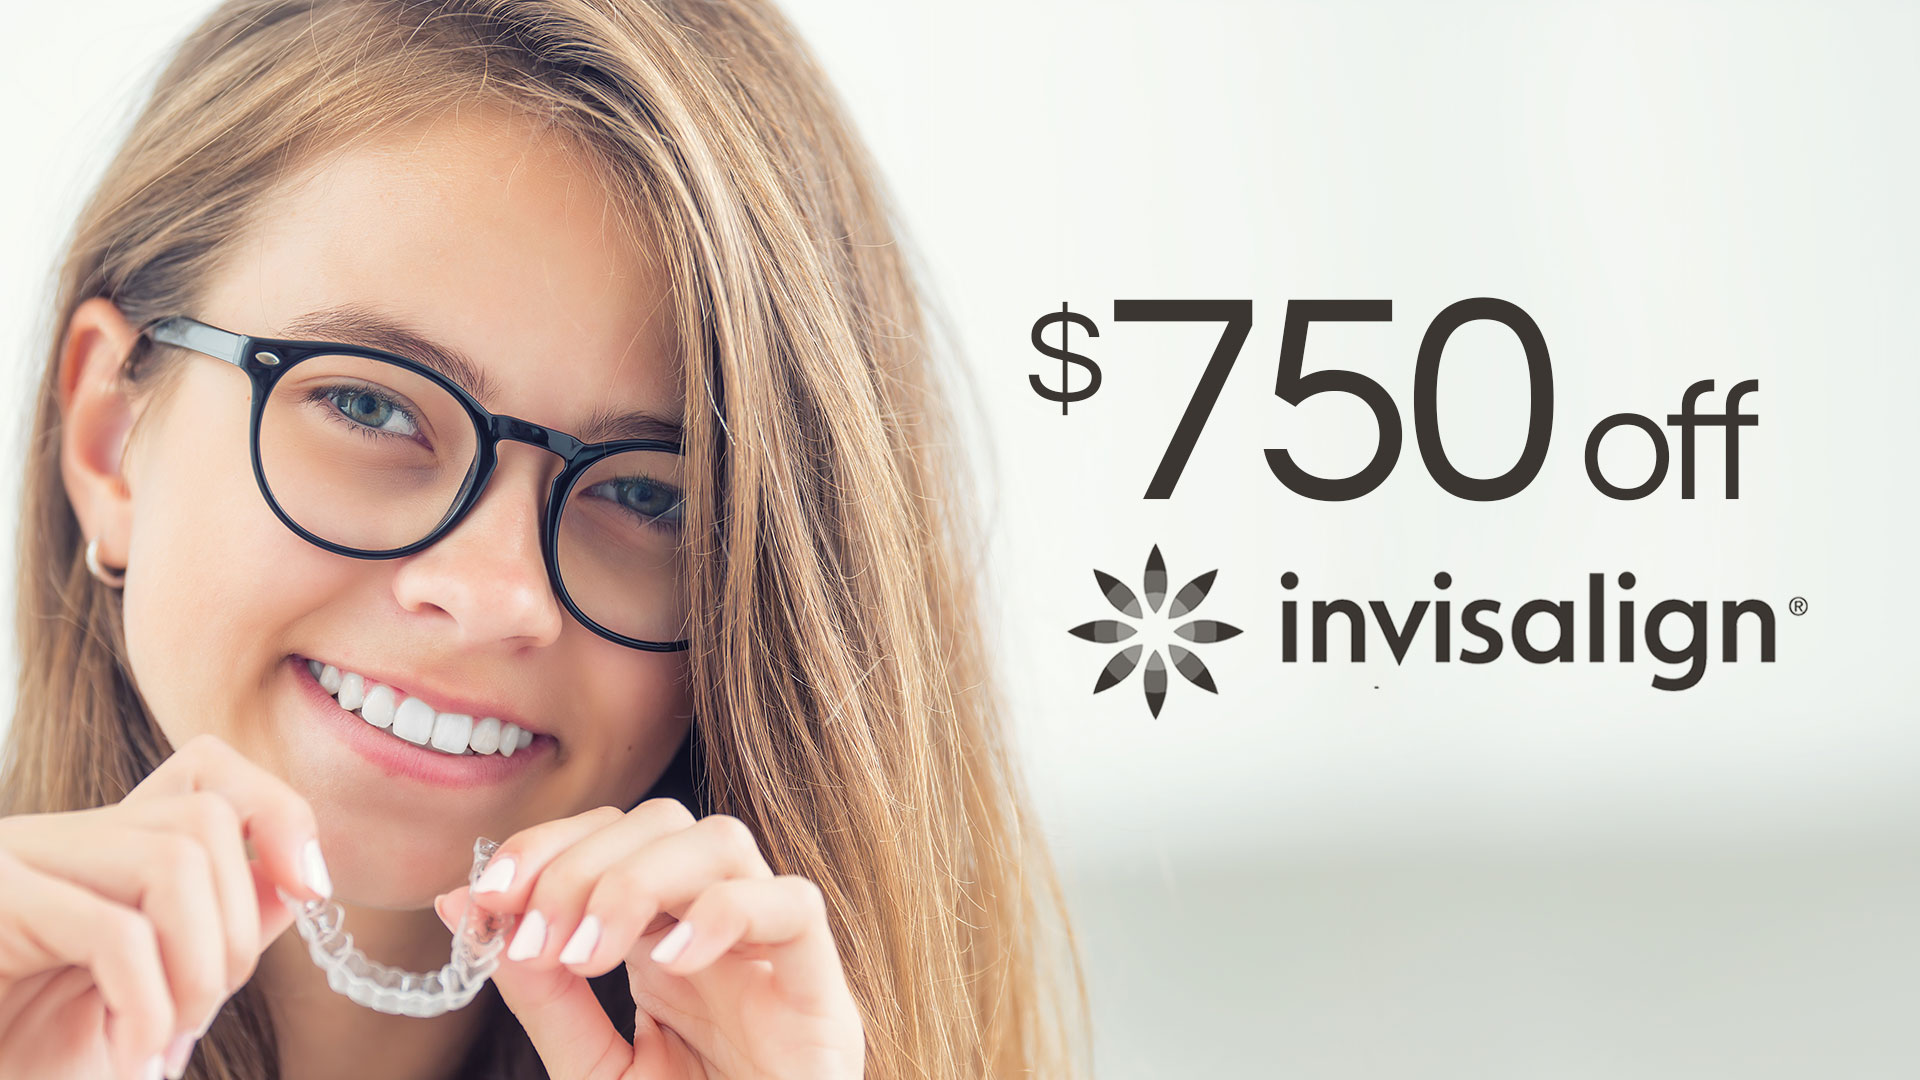 Year End Invisalign Promotion